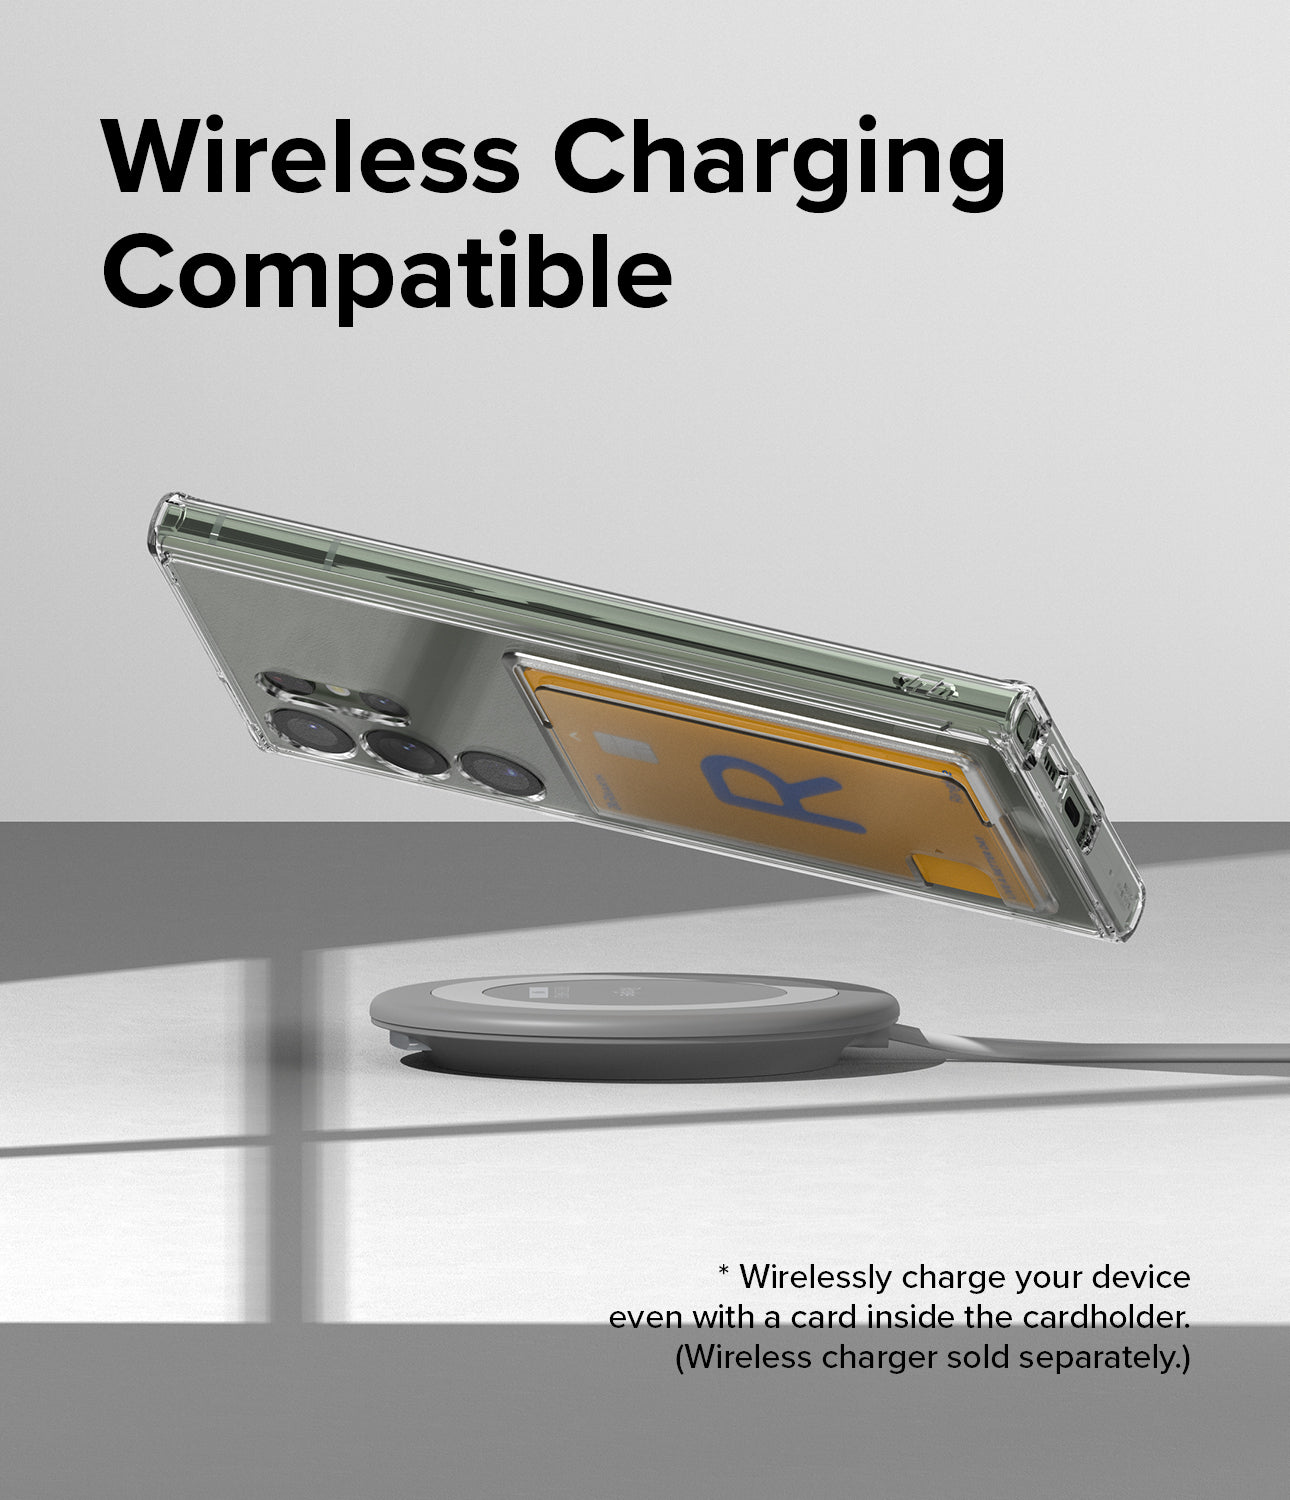 Wireless Charging Compatible l *Wirelessly charge your device even with a card inside the cardholder (Wireless charger sold separately.)